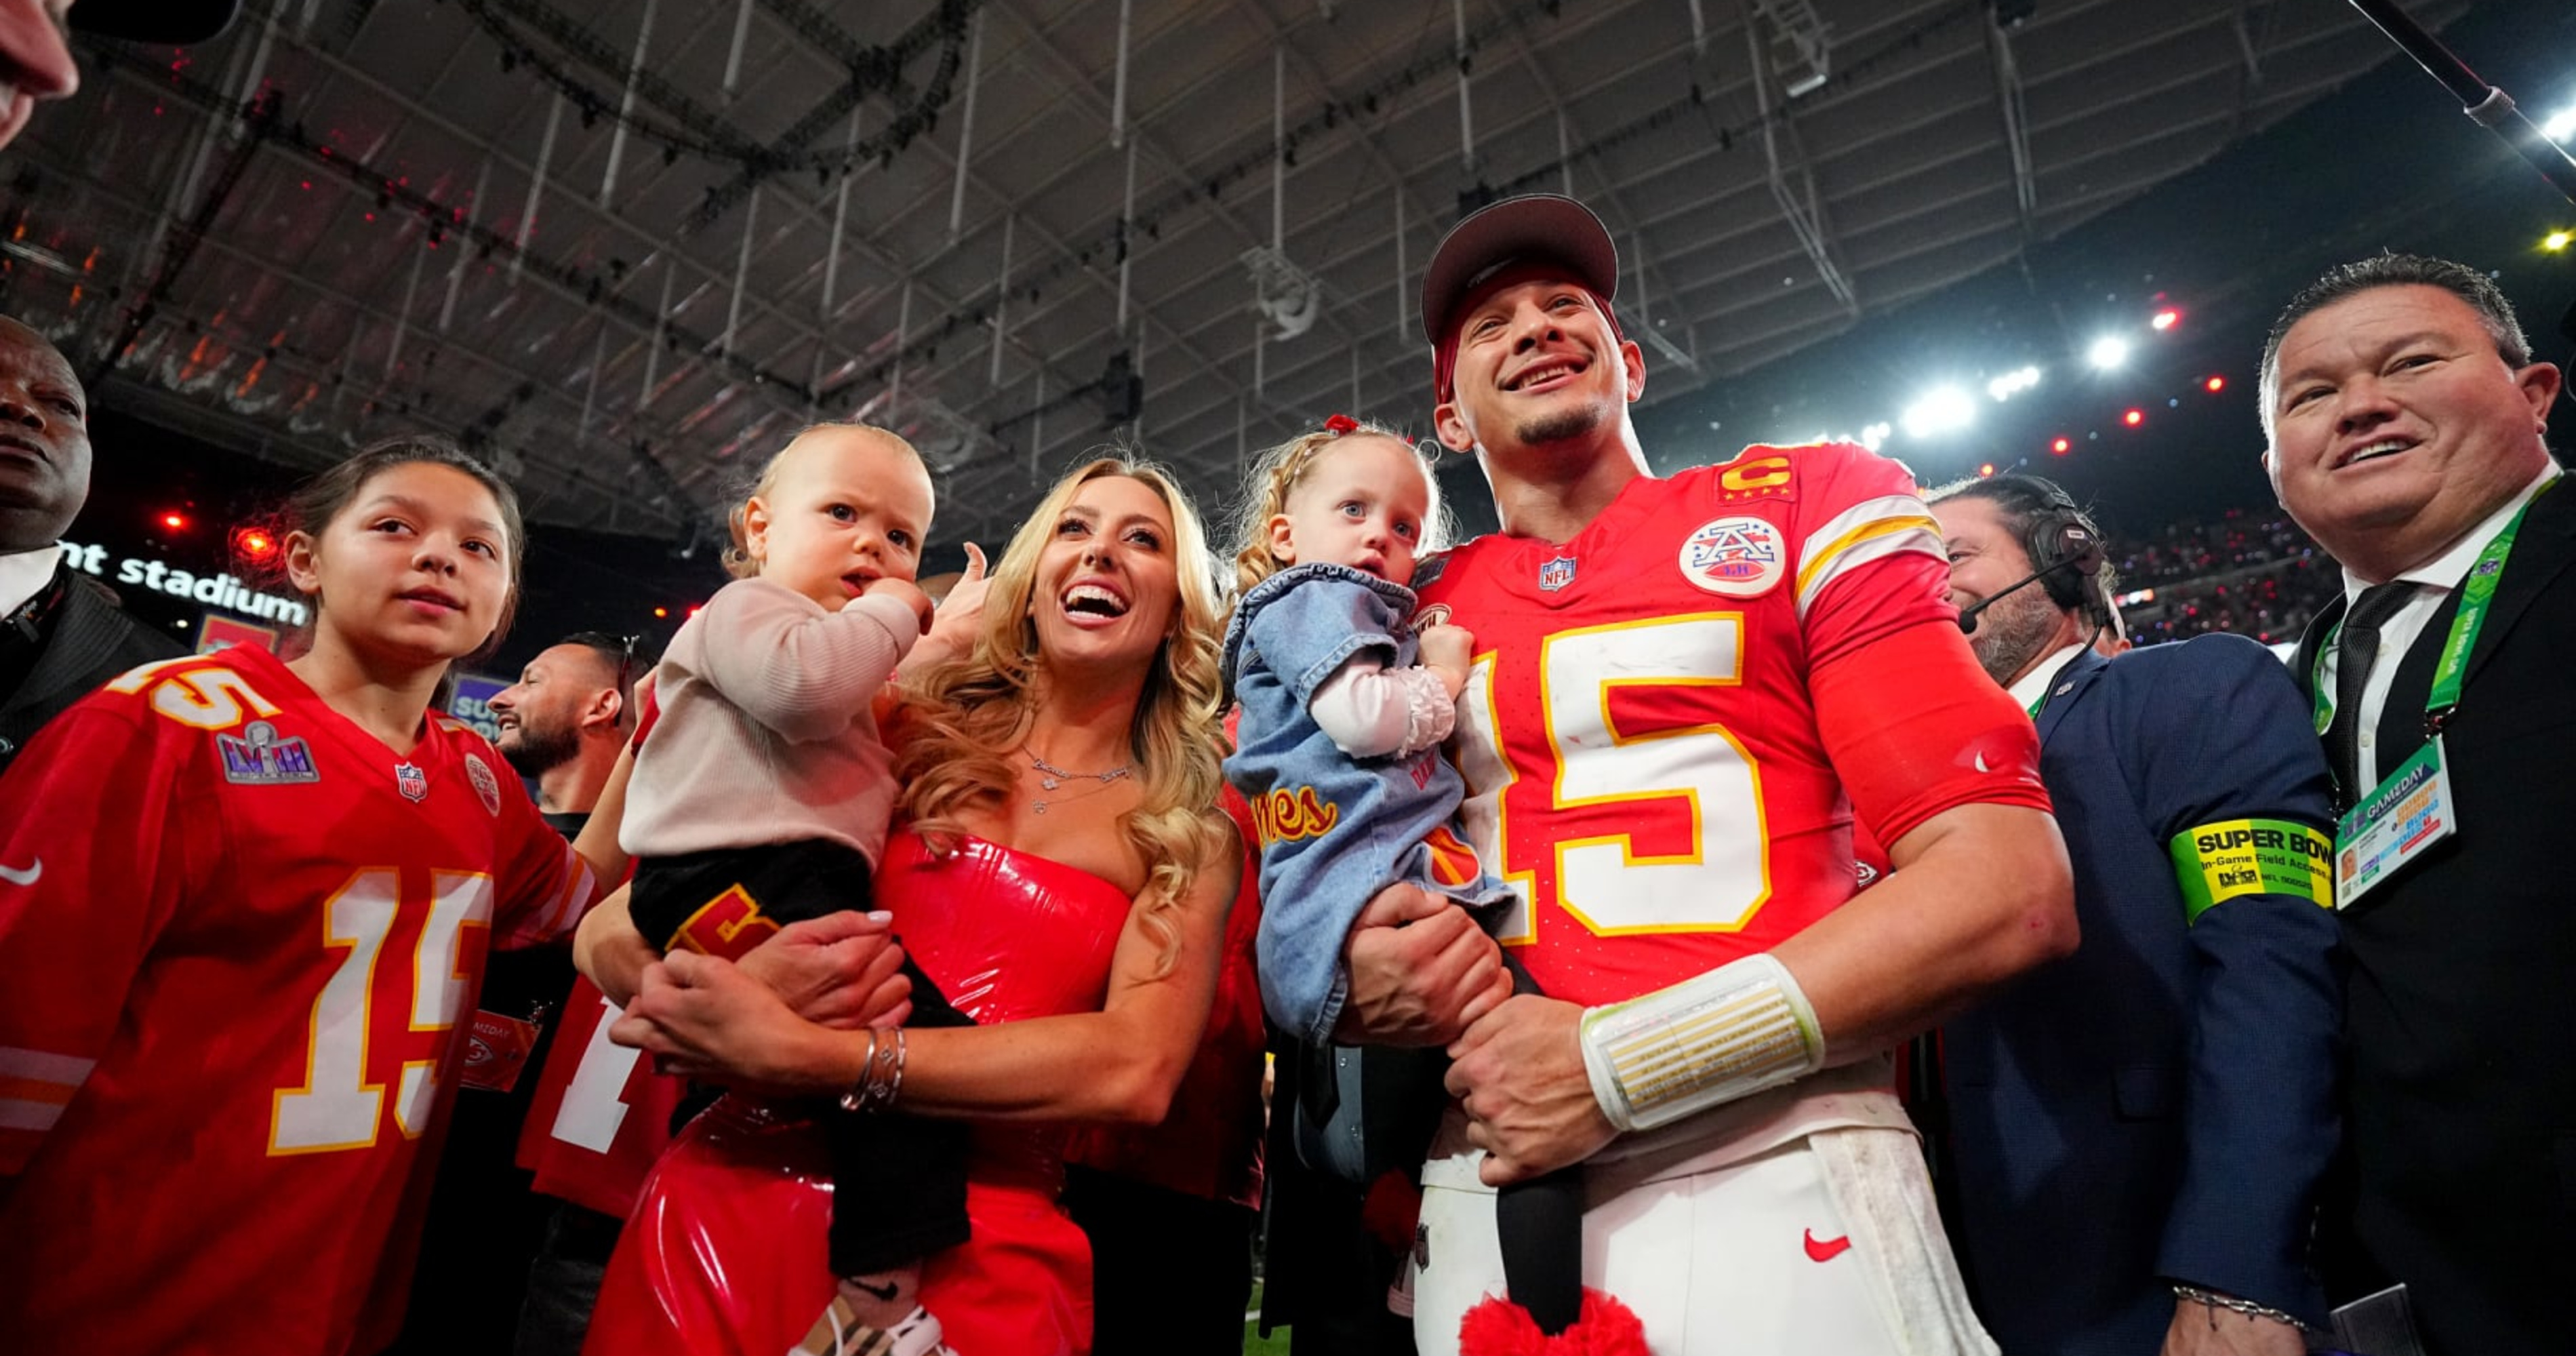 Patrick Mahomes, Wife Brittany Reveal They're Having Daughter in New Instagram Video